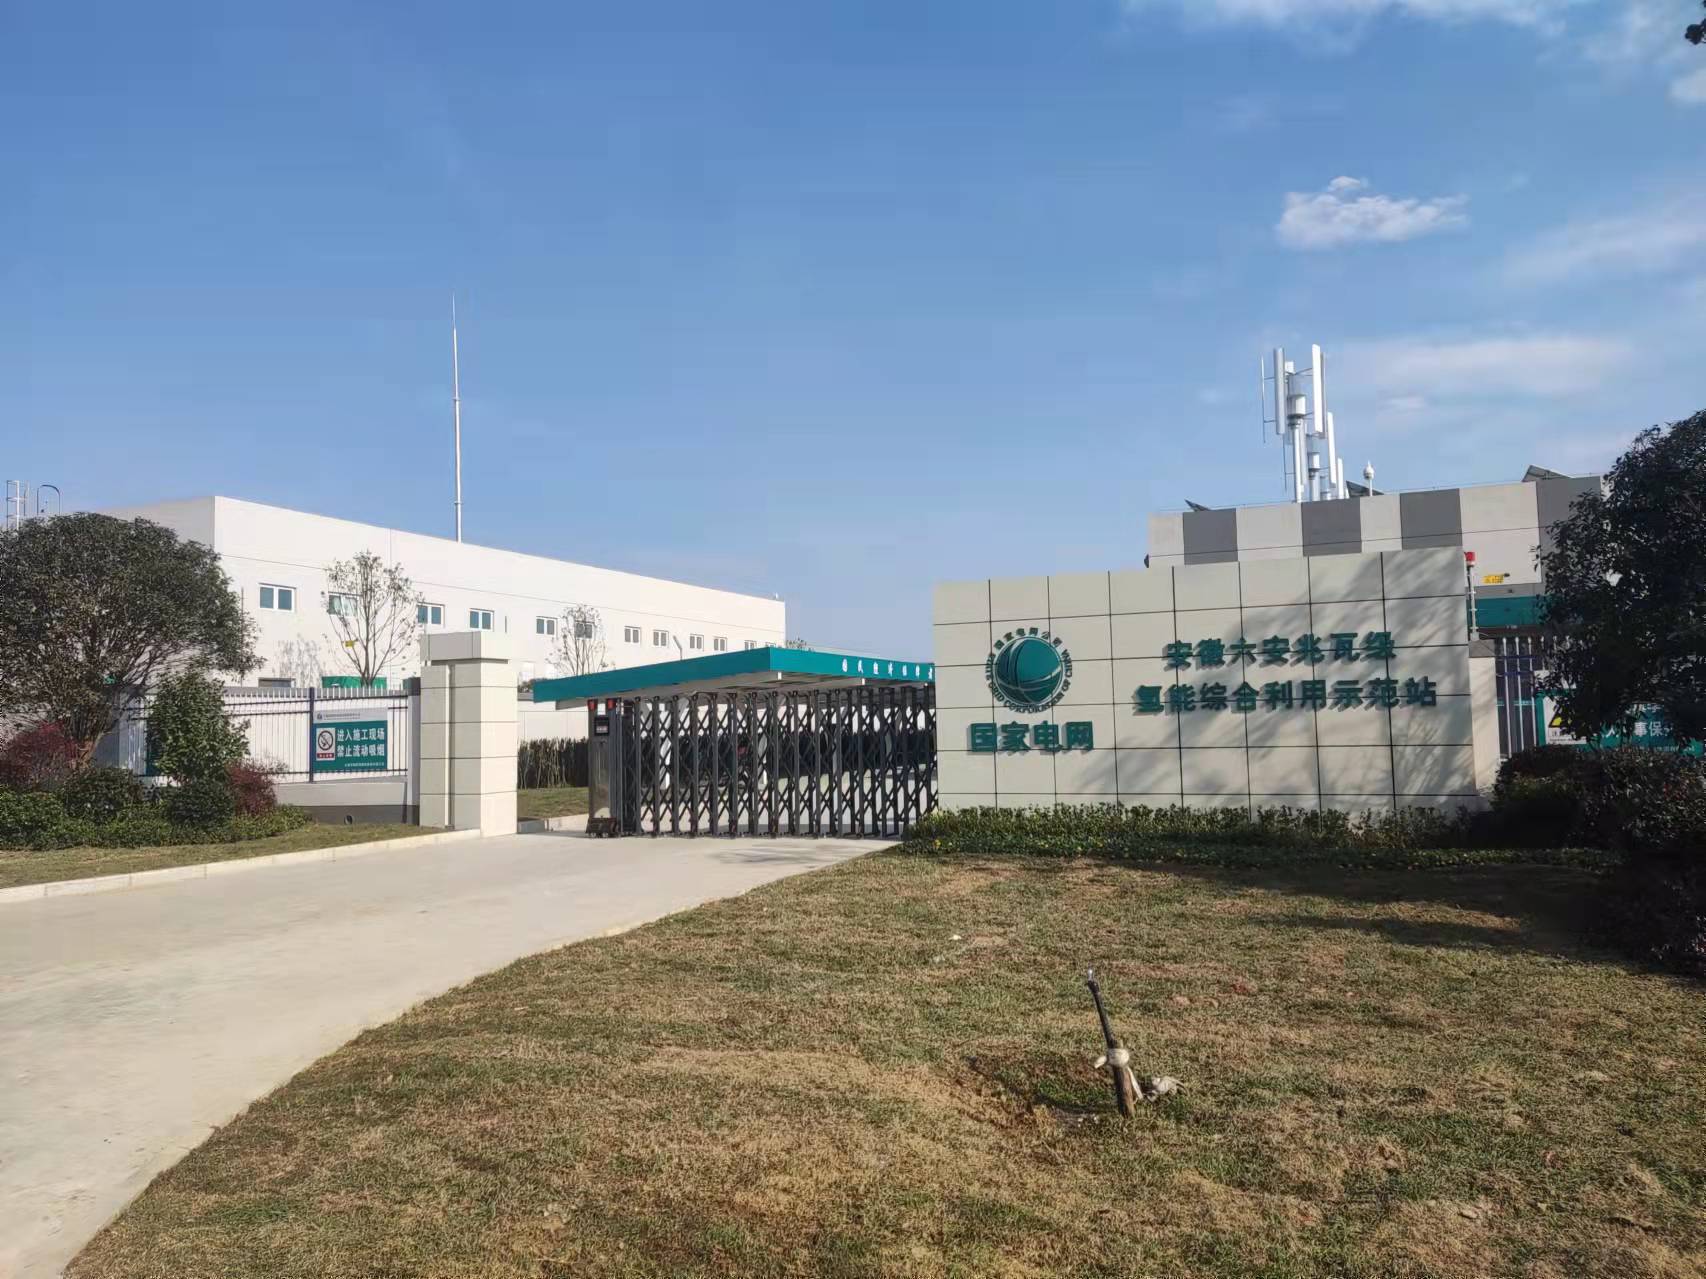 China's first megawatt-class hydrogen power plant connected to the grid in Lu'an